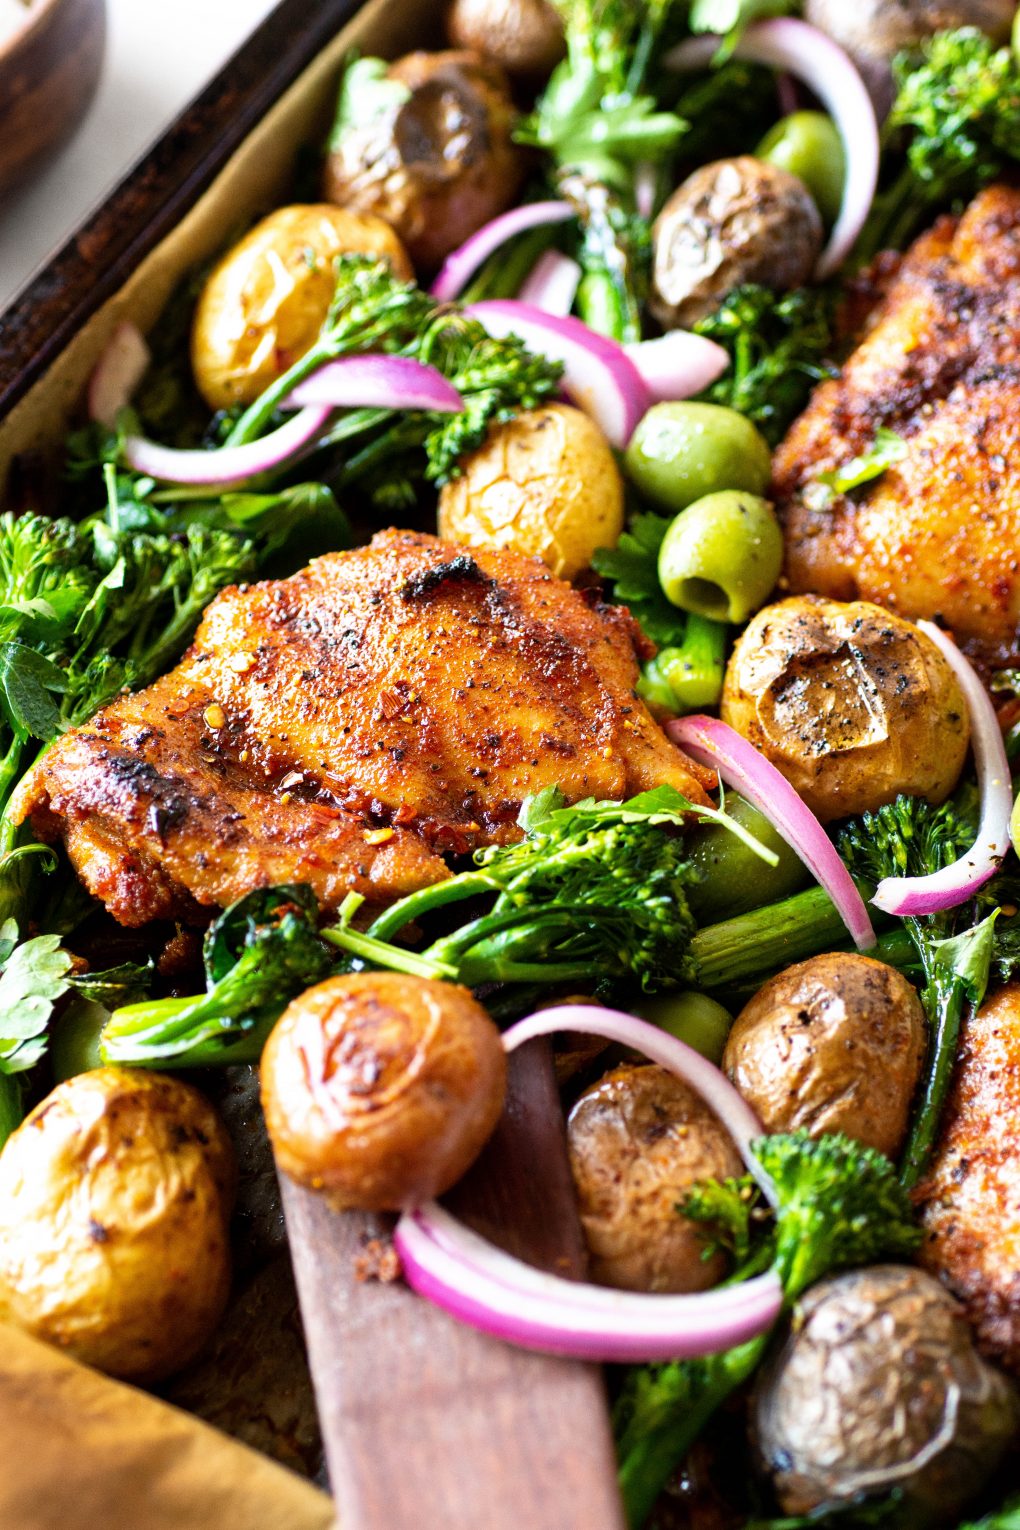 A 45 degree view of a roasting tray with spiced chicken thighs, potatos, broccolini, olives, and pickled red onions